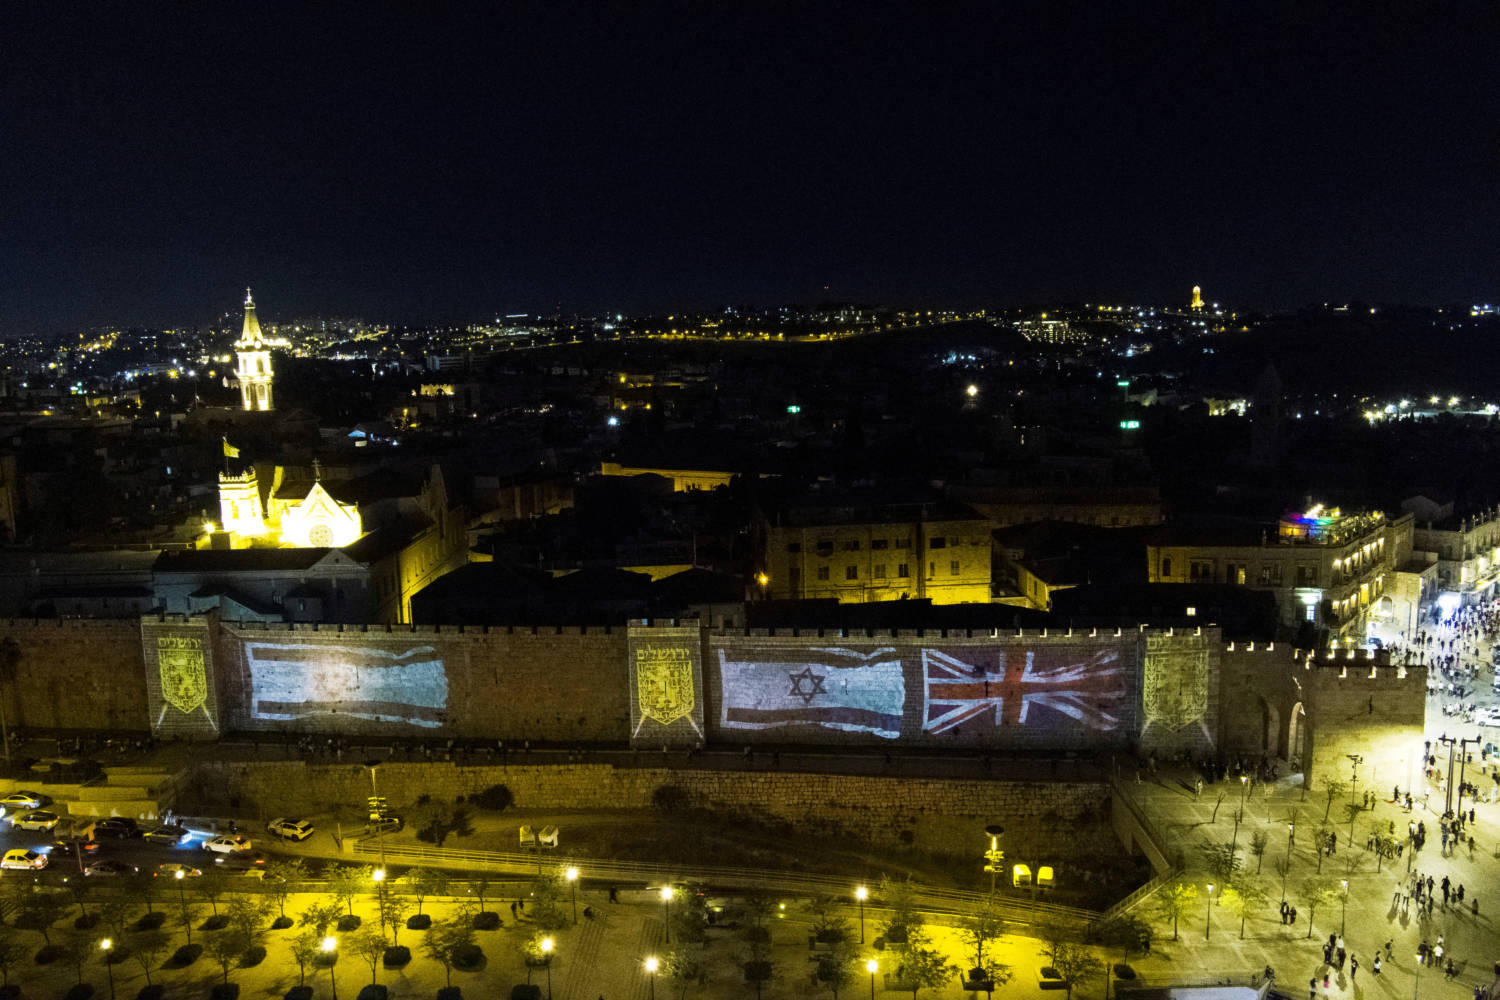 The Union Jack Flag And Israel's National Flag Are Projected On The Walls Of Jerusalem's Old City Following The Death Of Queen Elizabeth, In Jerusalem